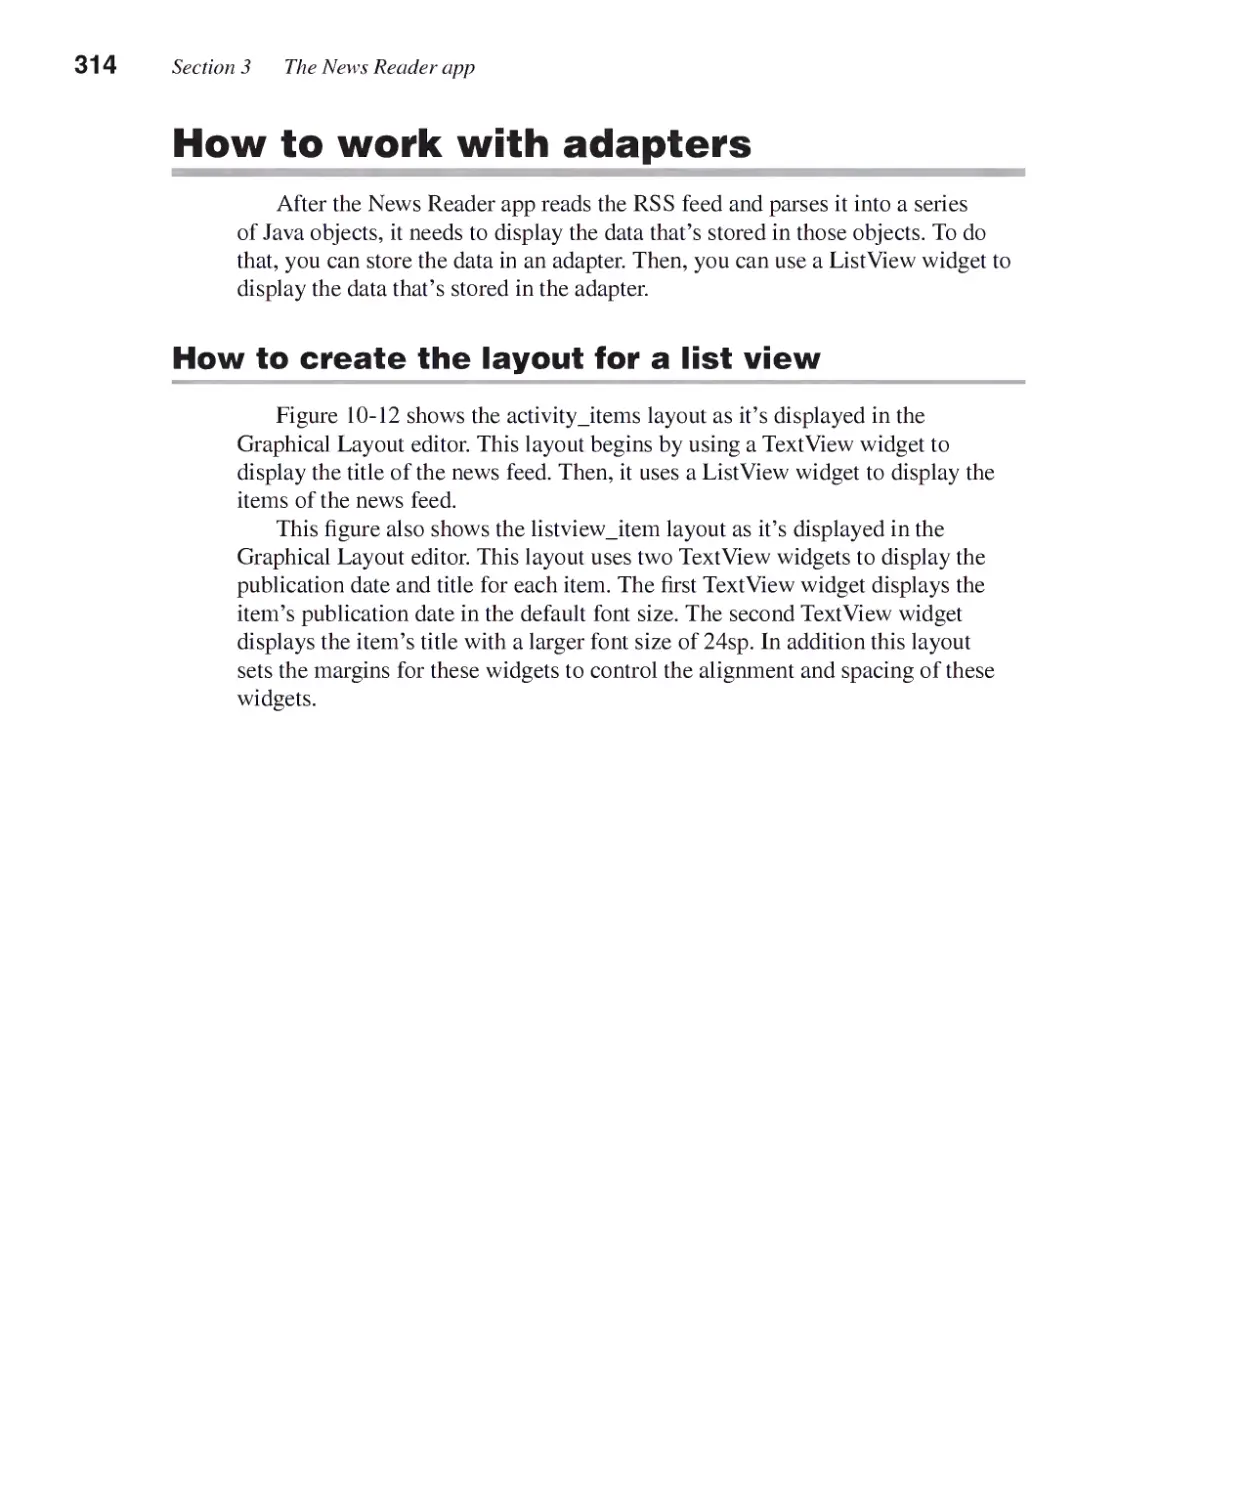 How to Work with Adapters